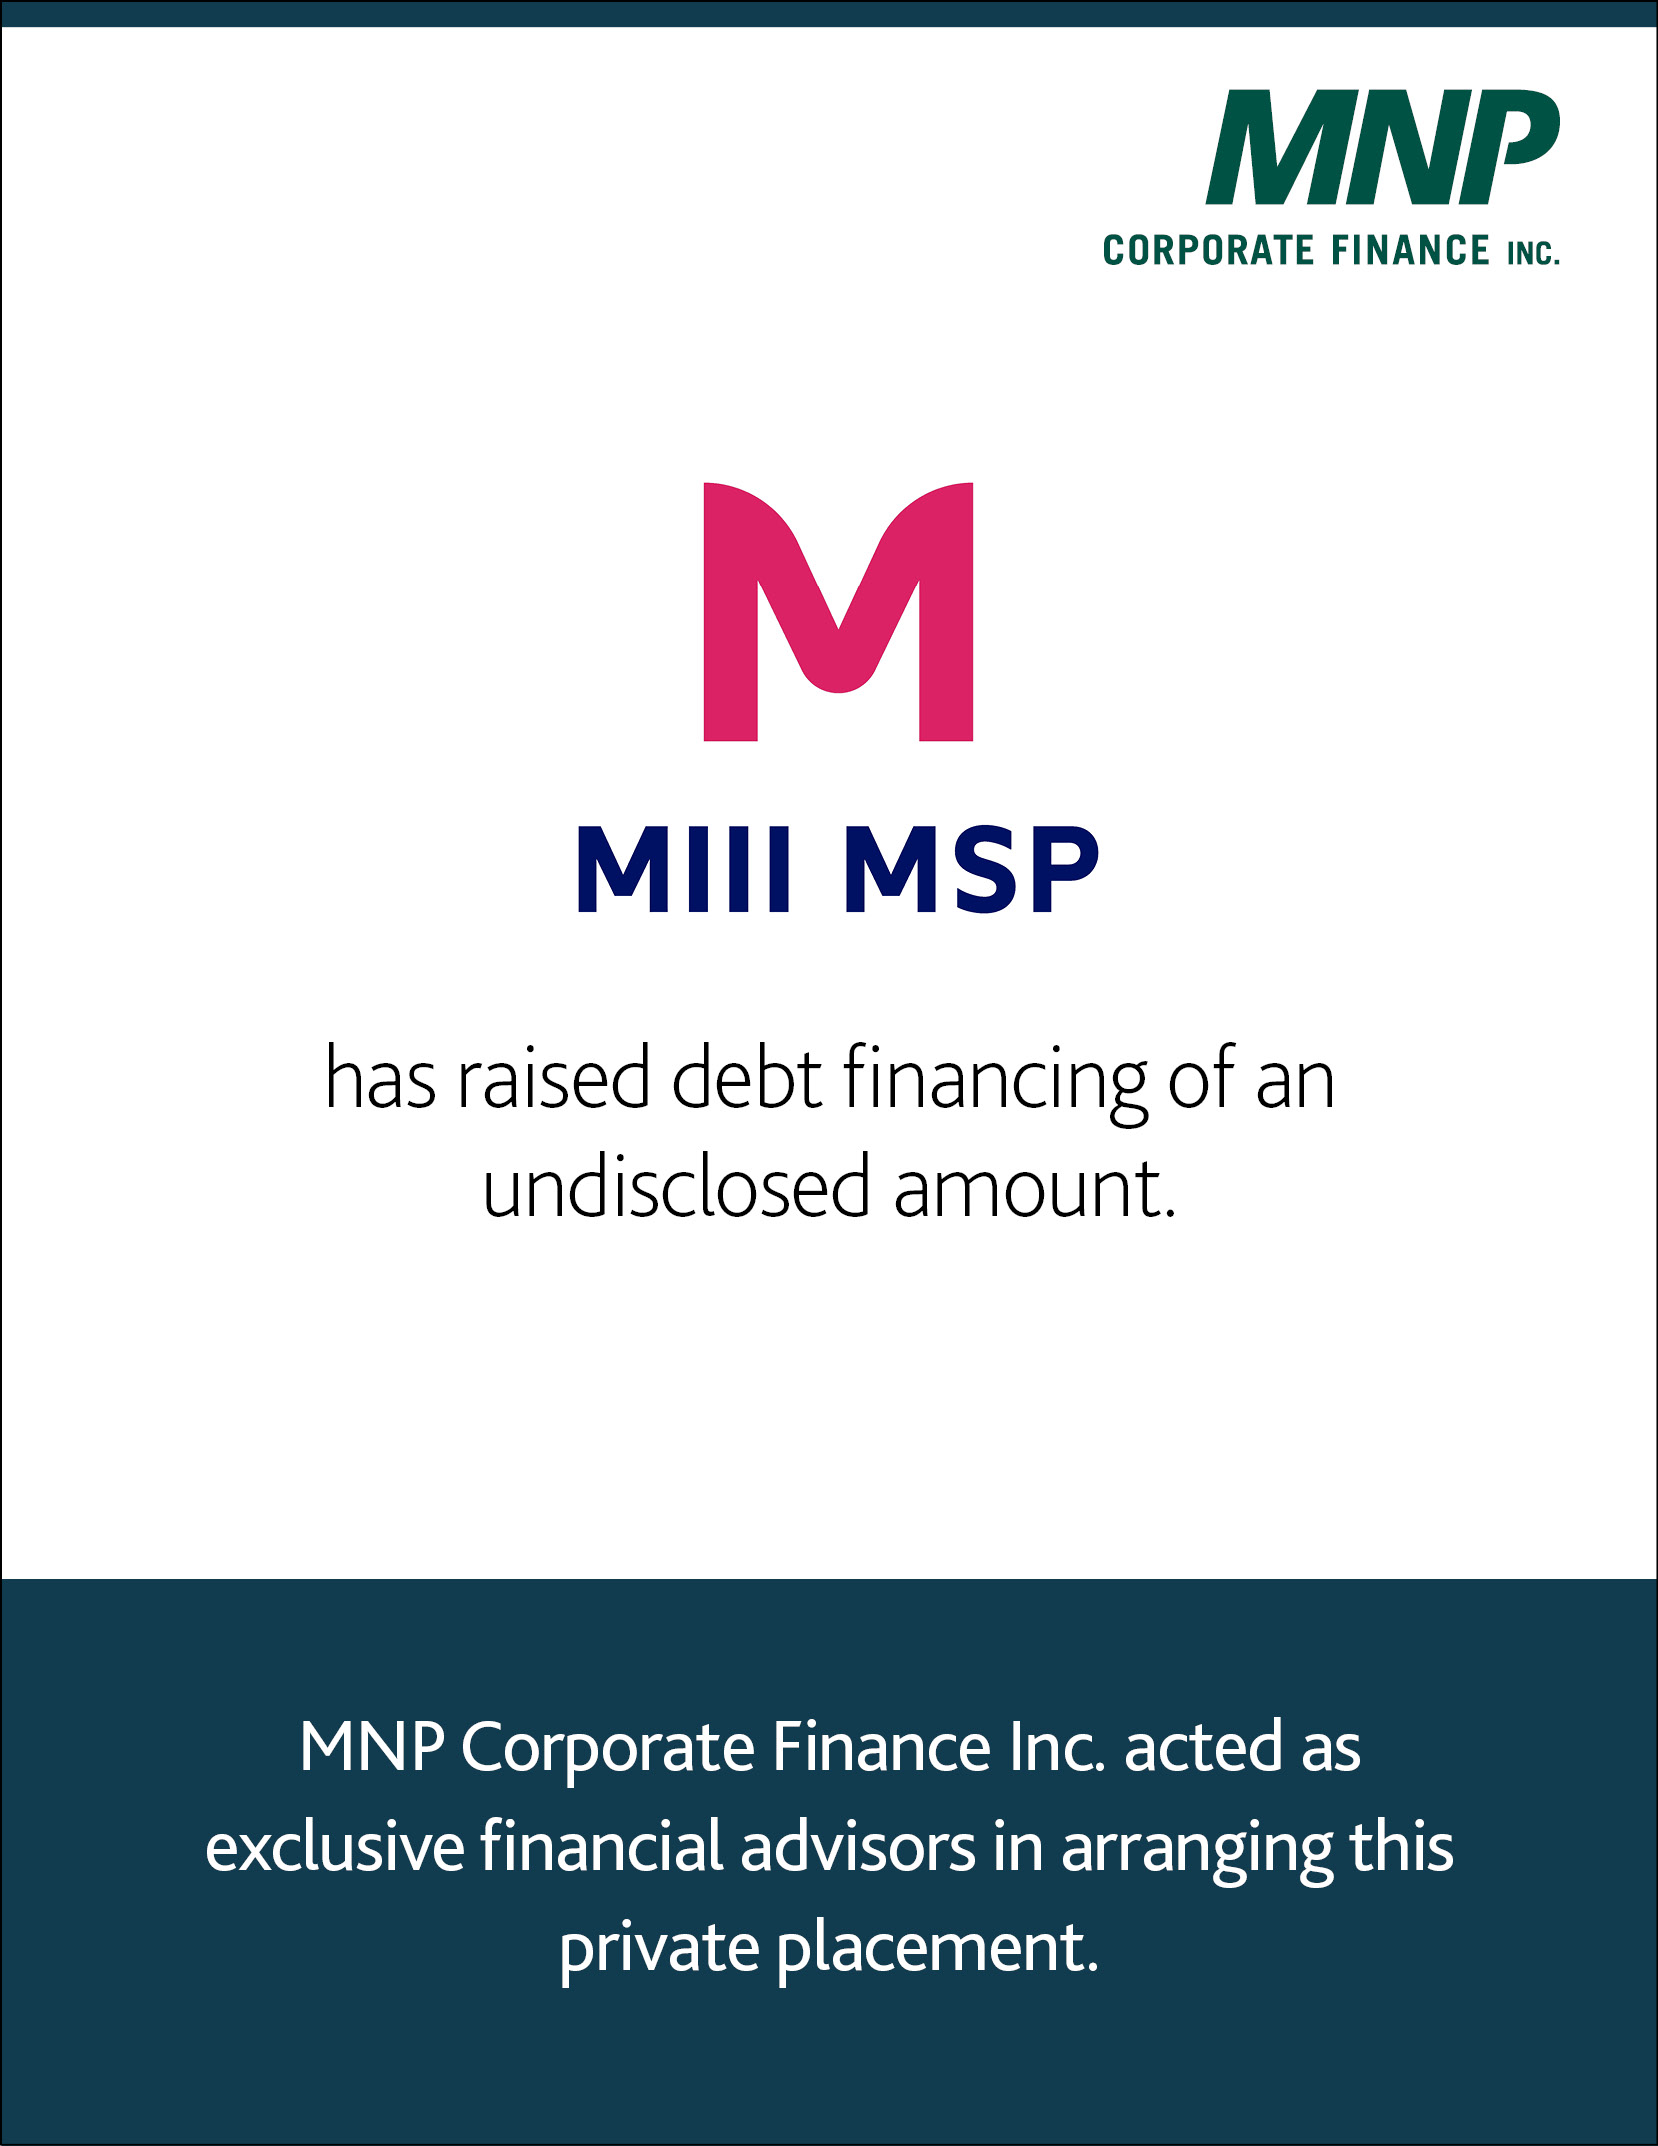 Mill MSP Triella logo with text underneath that says: "has raised debt financing of $4,250,000. MNP Corporate Finance Inc. acted as exclusive financial advisors in arranging this private placement."